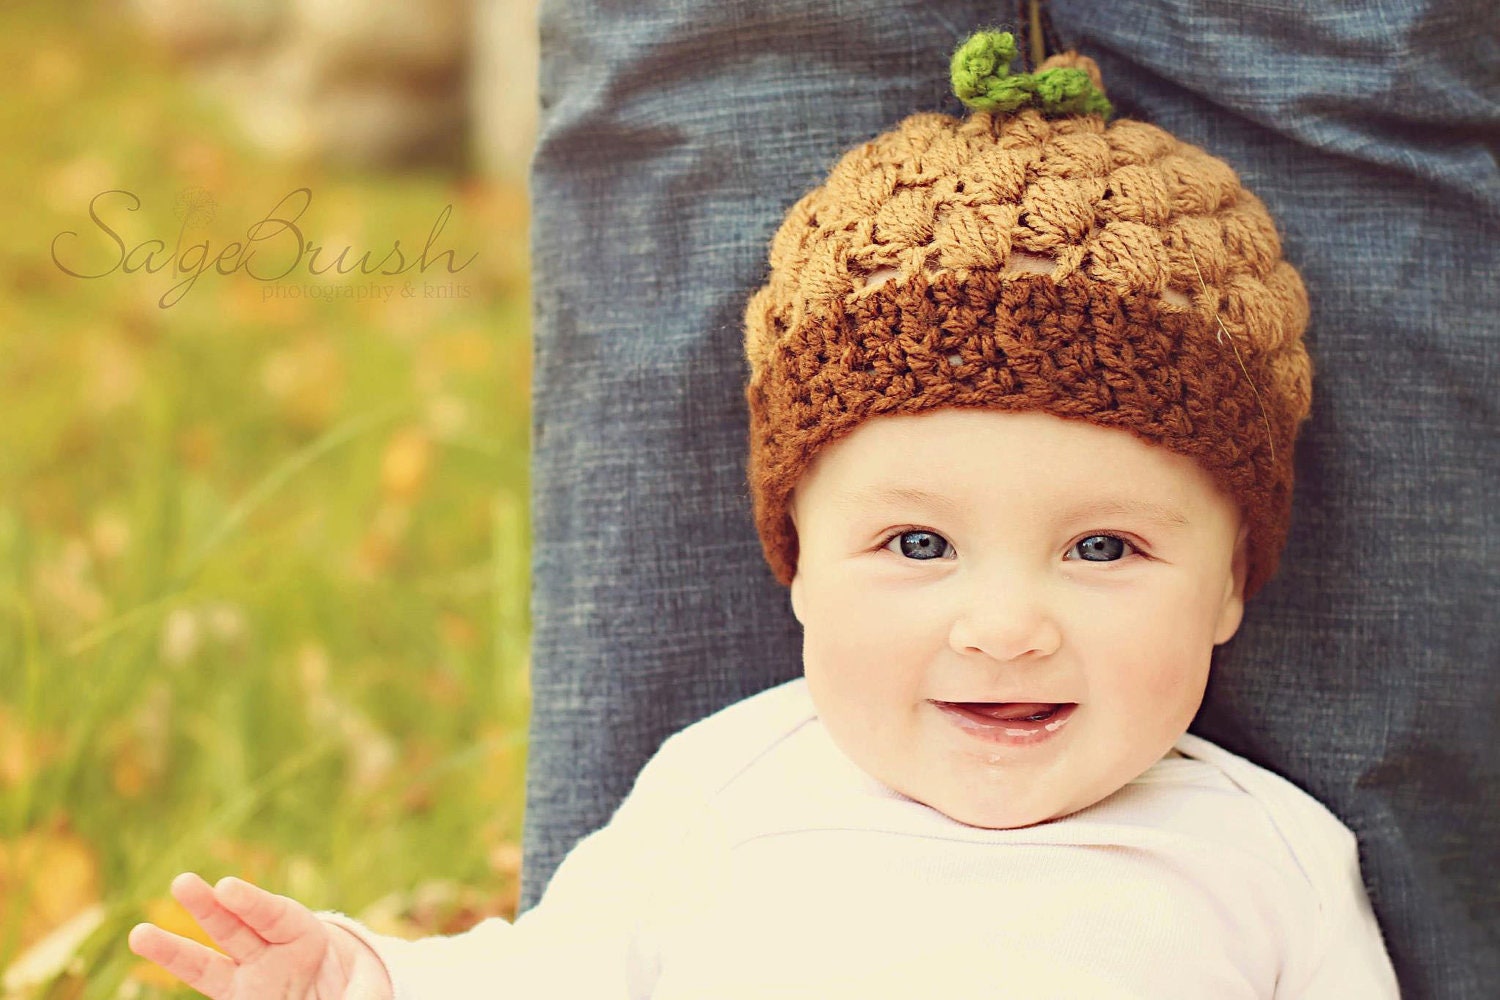 Crochet Acorn Hat with Leaf - PDF Pattern - 4 sizes up to 12 months